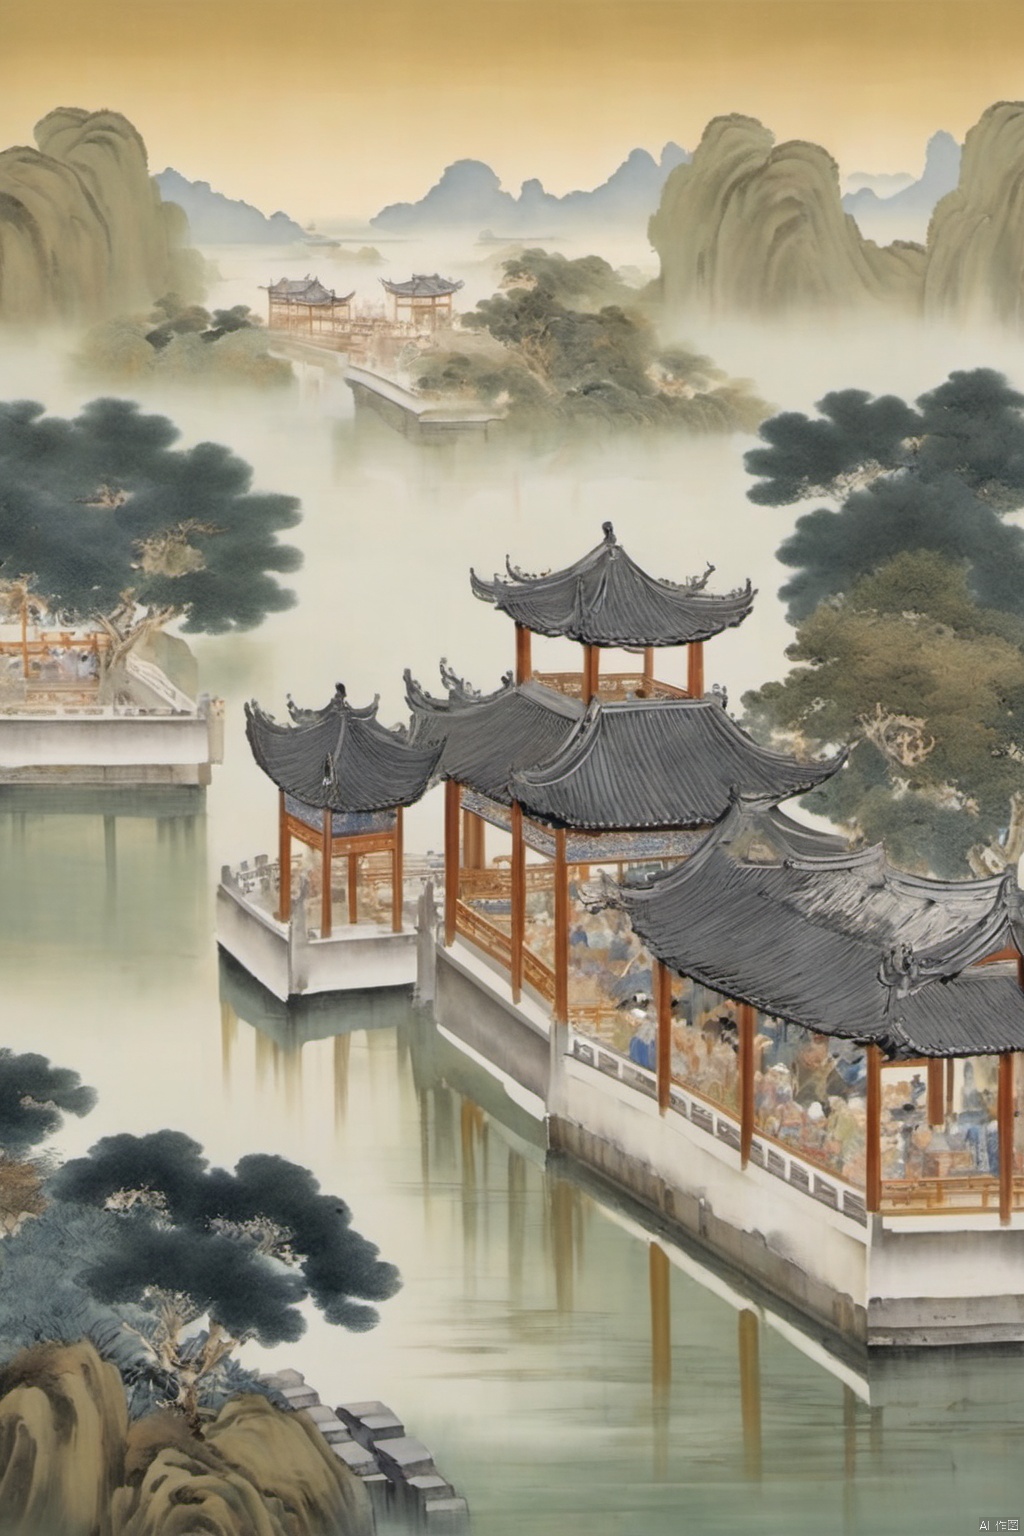 Oil painting, Wall mural style with gold-colored paint,Scenery of the Jiangnan water towns,Huizhou-style architecture,trees,houses,mountains,moon,clouds,moonlight,river,reflection,arch bridge,steps,pavilion,moss,rocks,sky,cloud,fog,